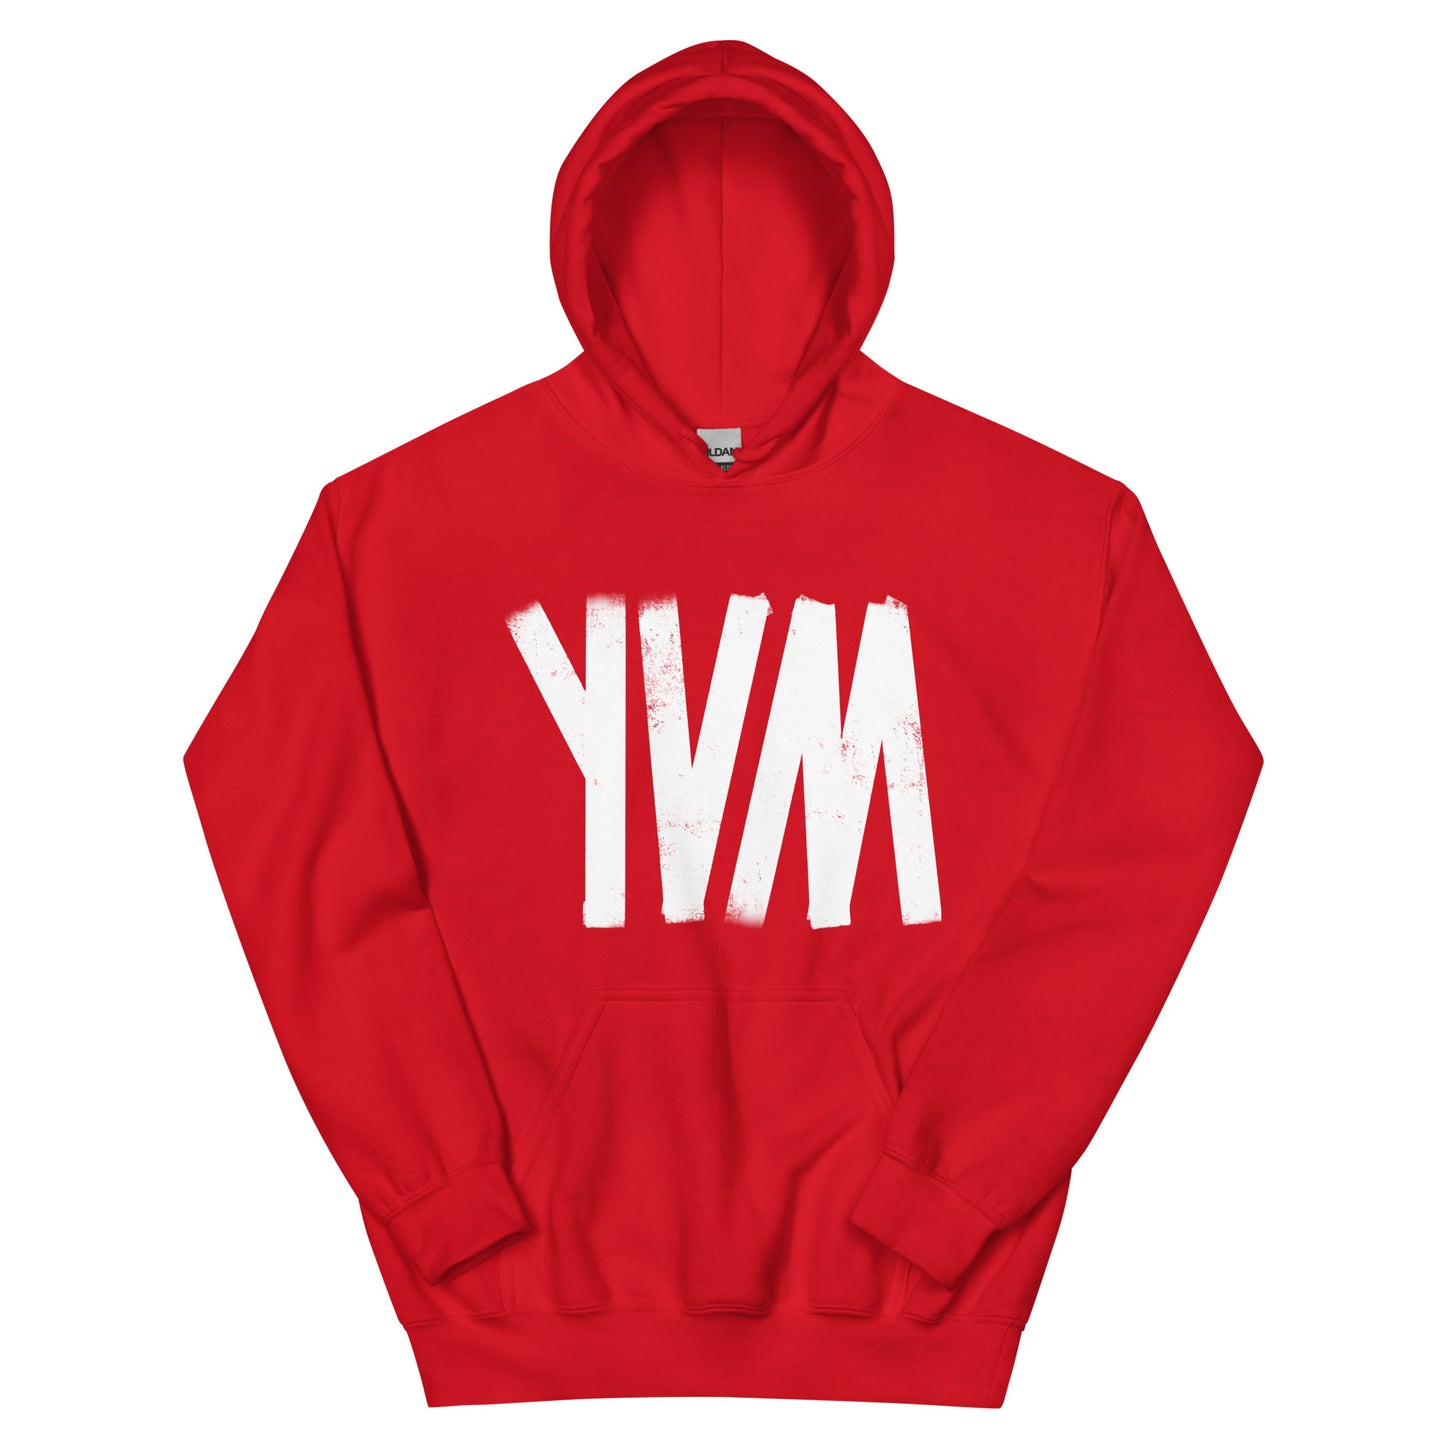 Your Voice Matters Unisex Hoodie